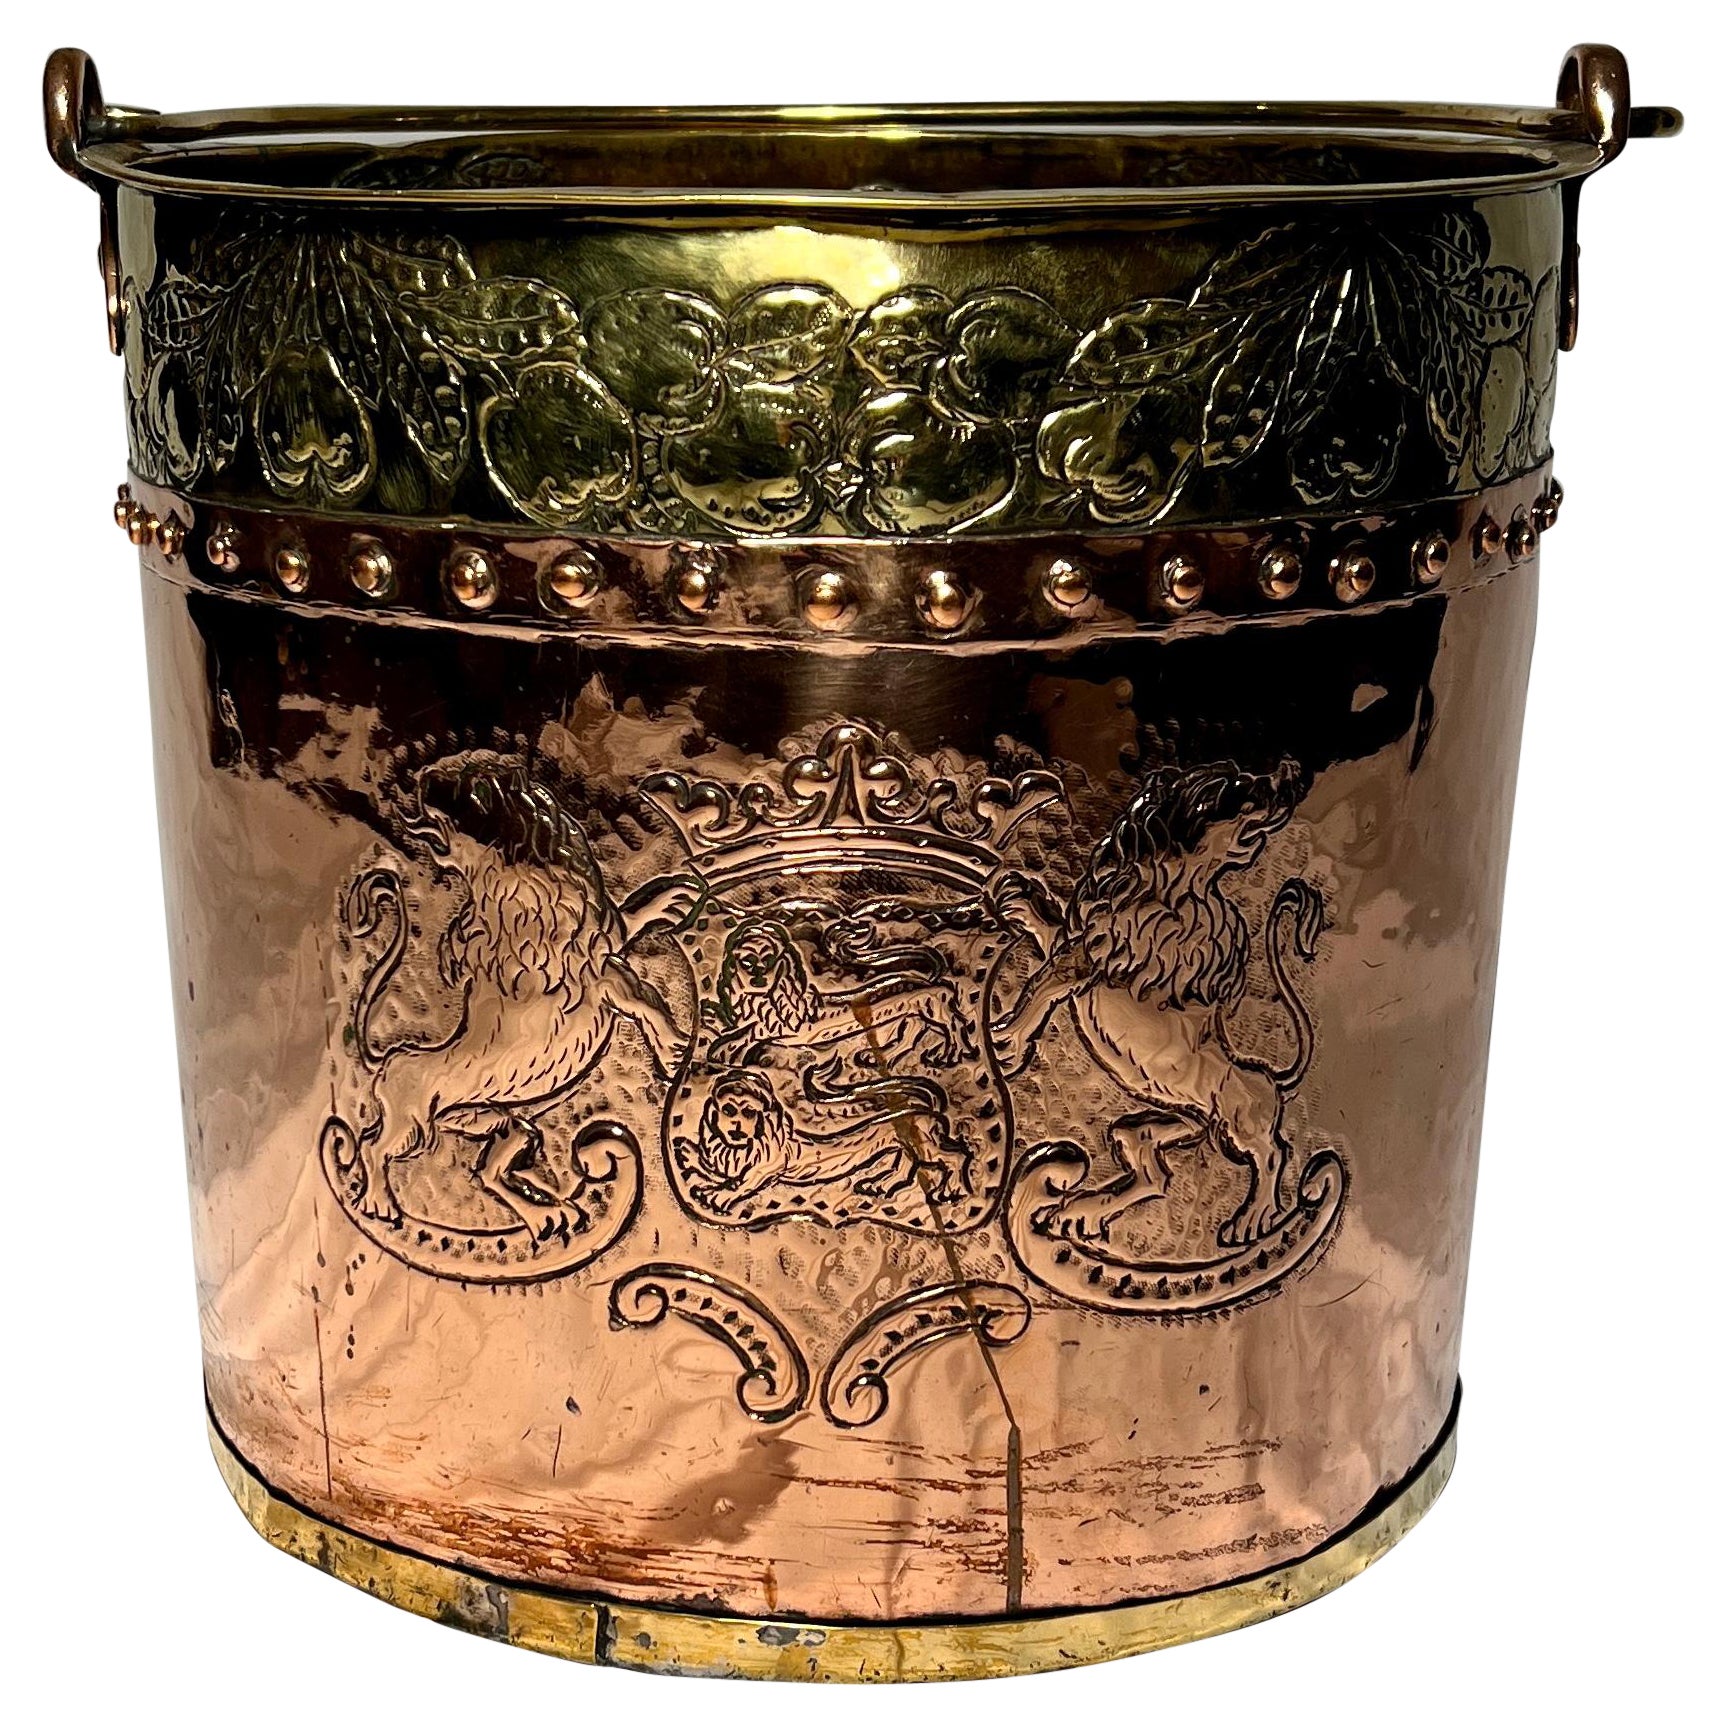 Antique English Copper and Brass Repousse Bucket